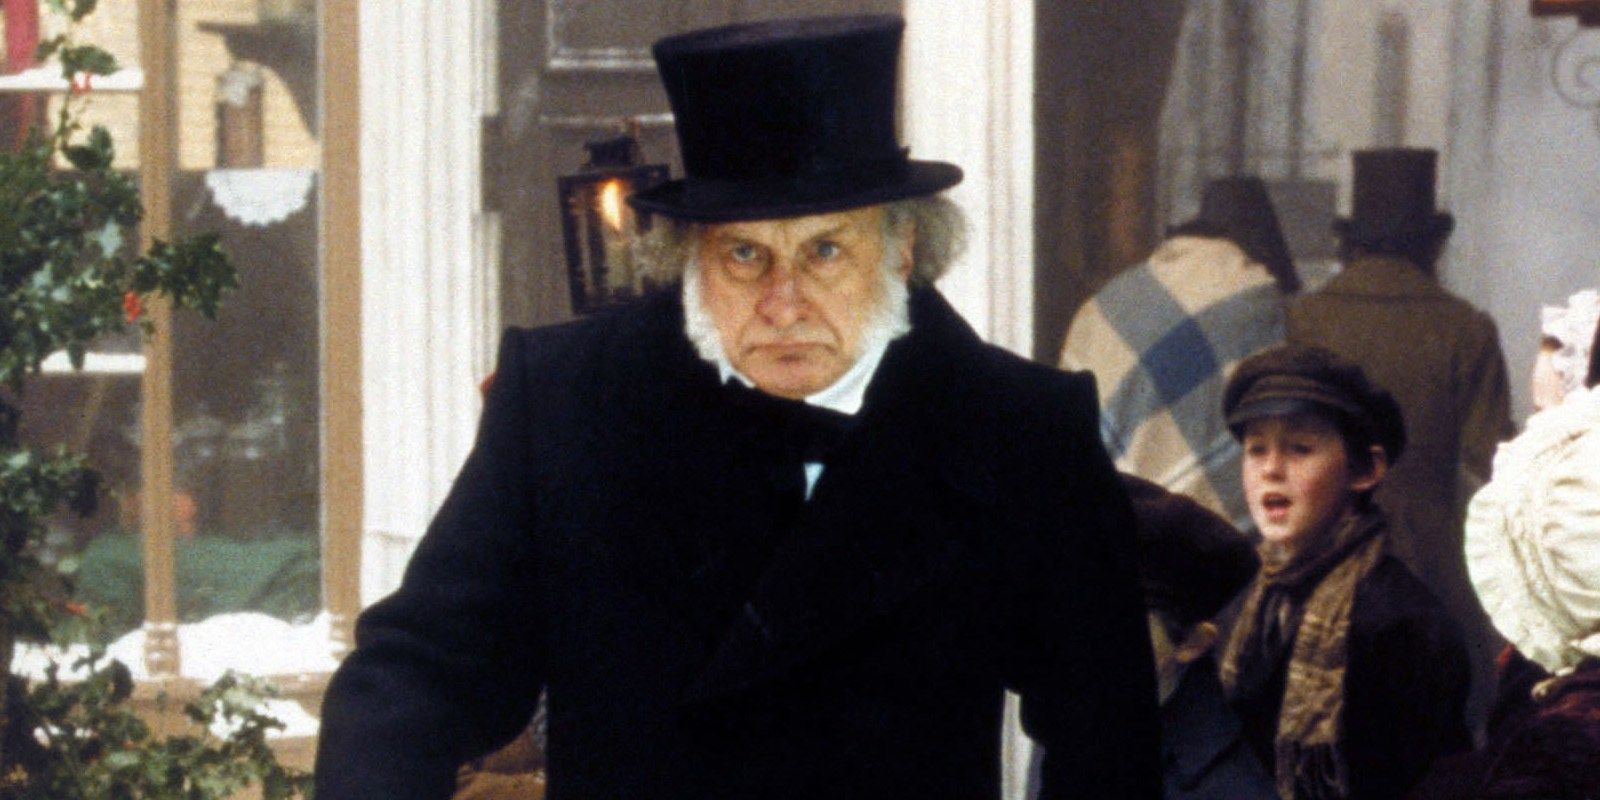 A Christmas Carol Ranking 15 Versions From Least To Most Accurate To The Book